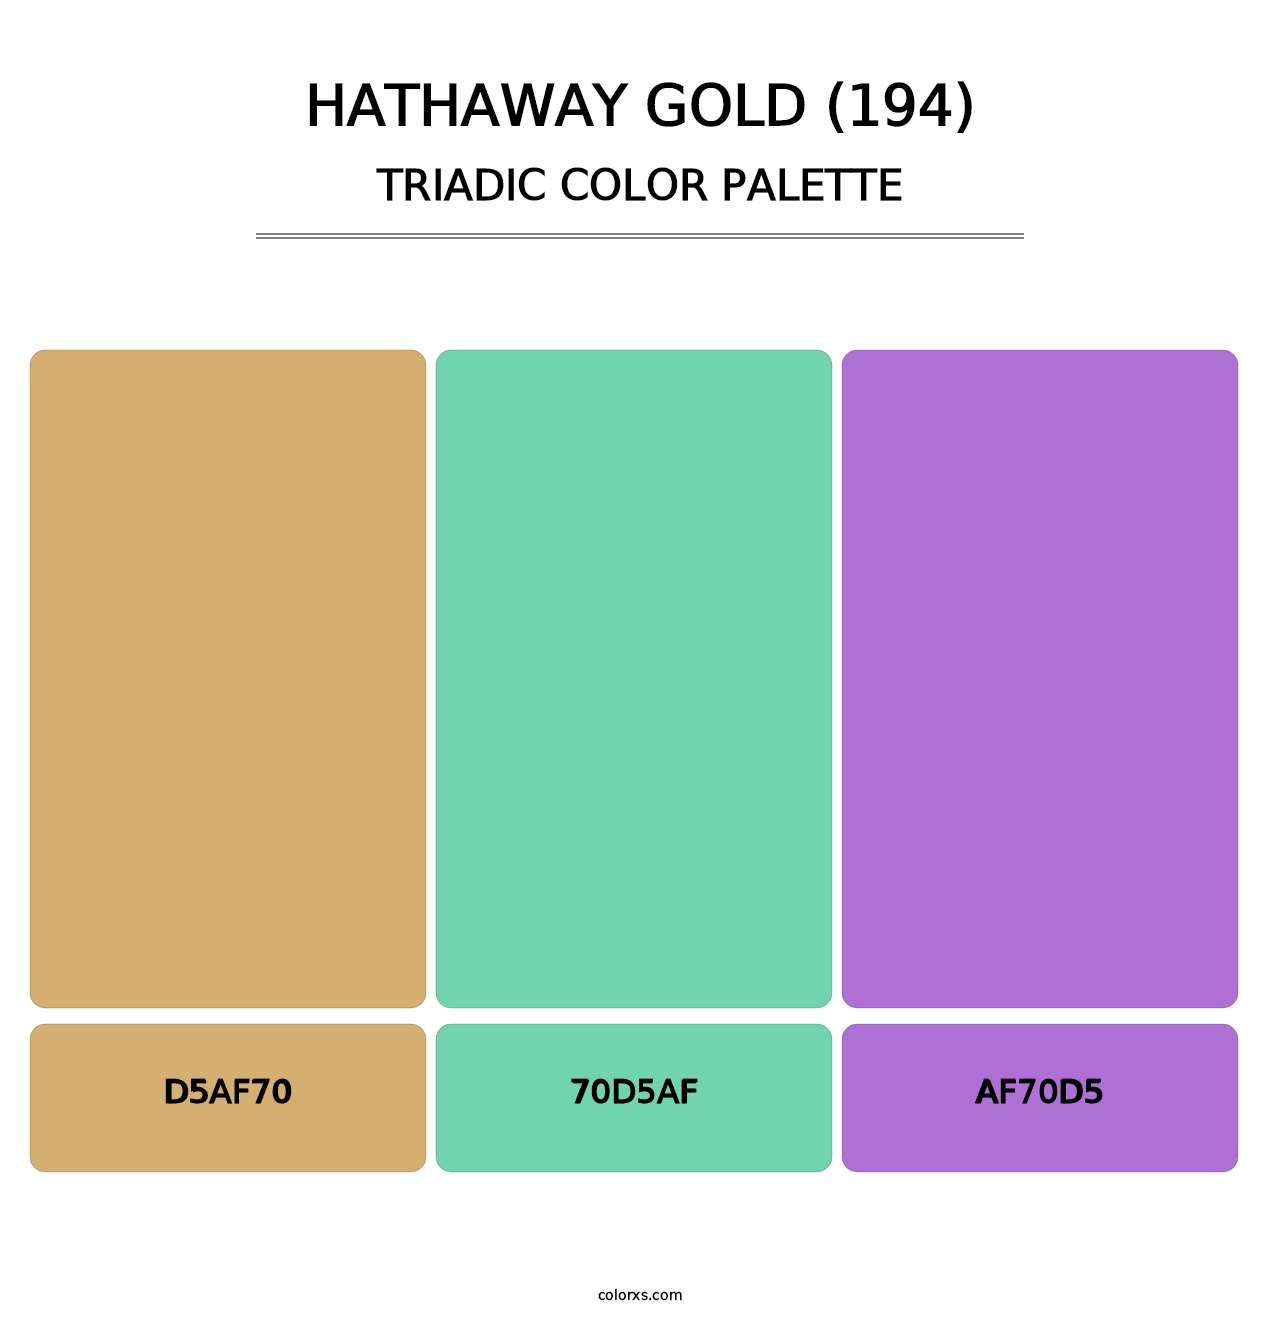 Hathaway Gold (194) - Triadic Color Palette